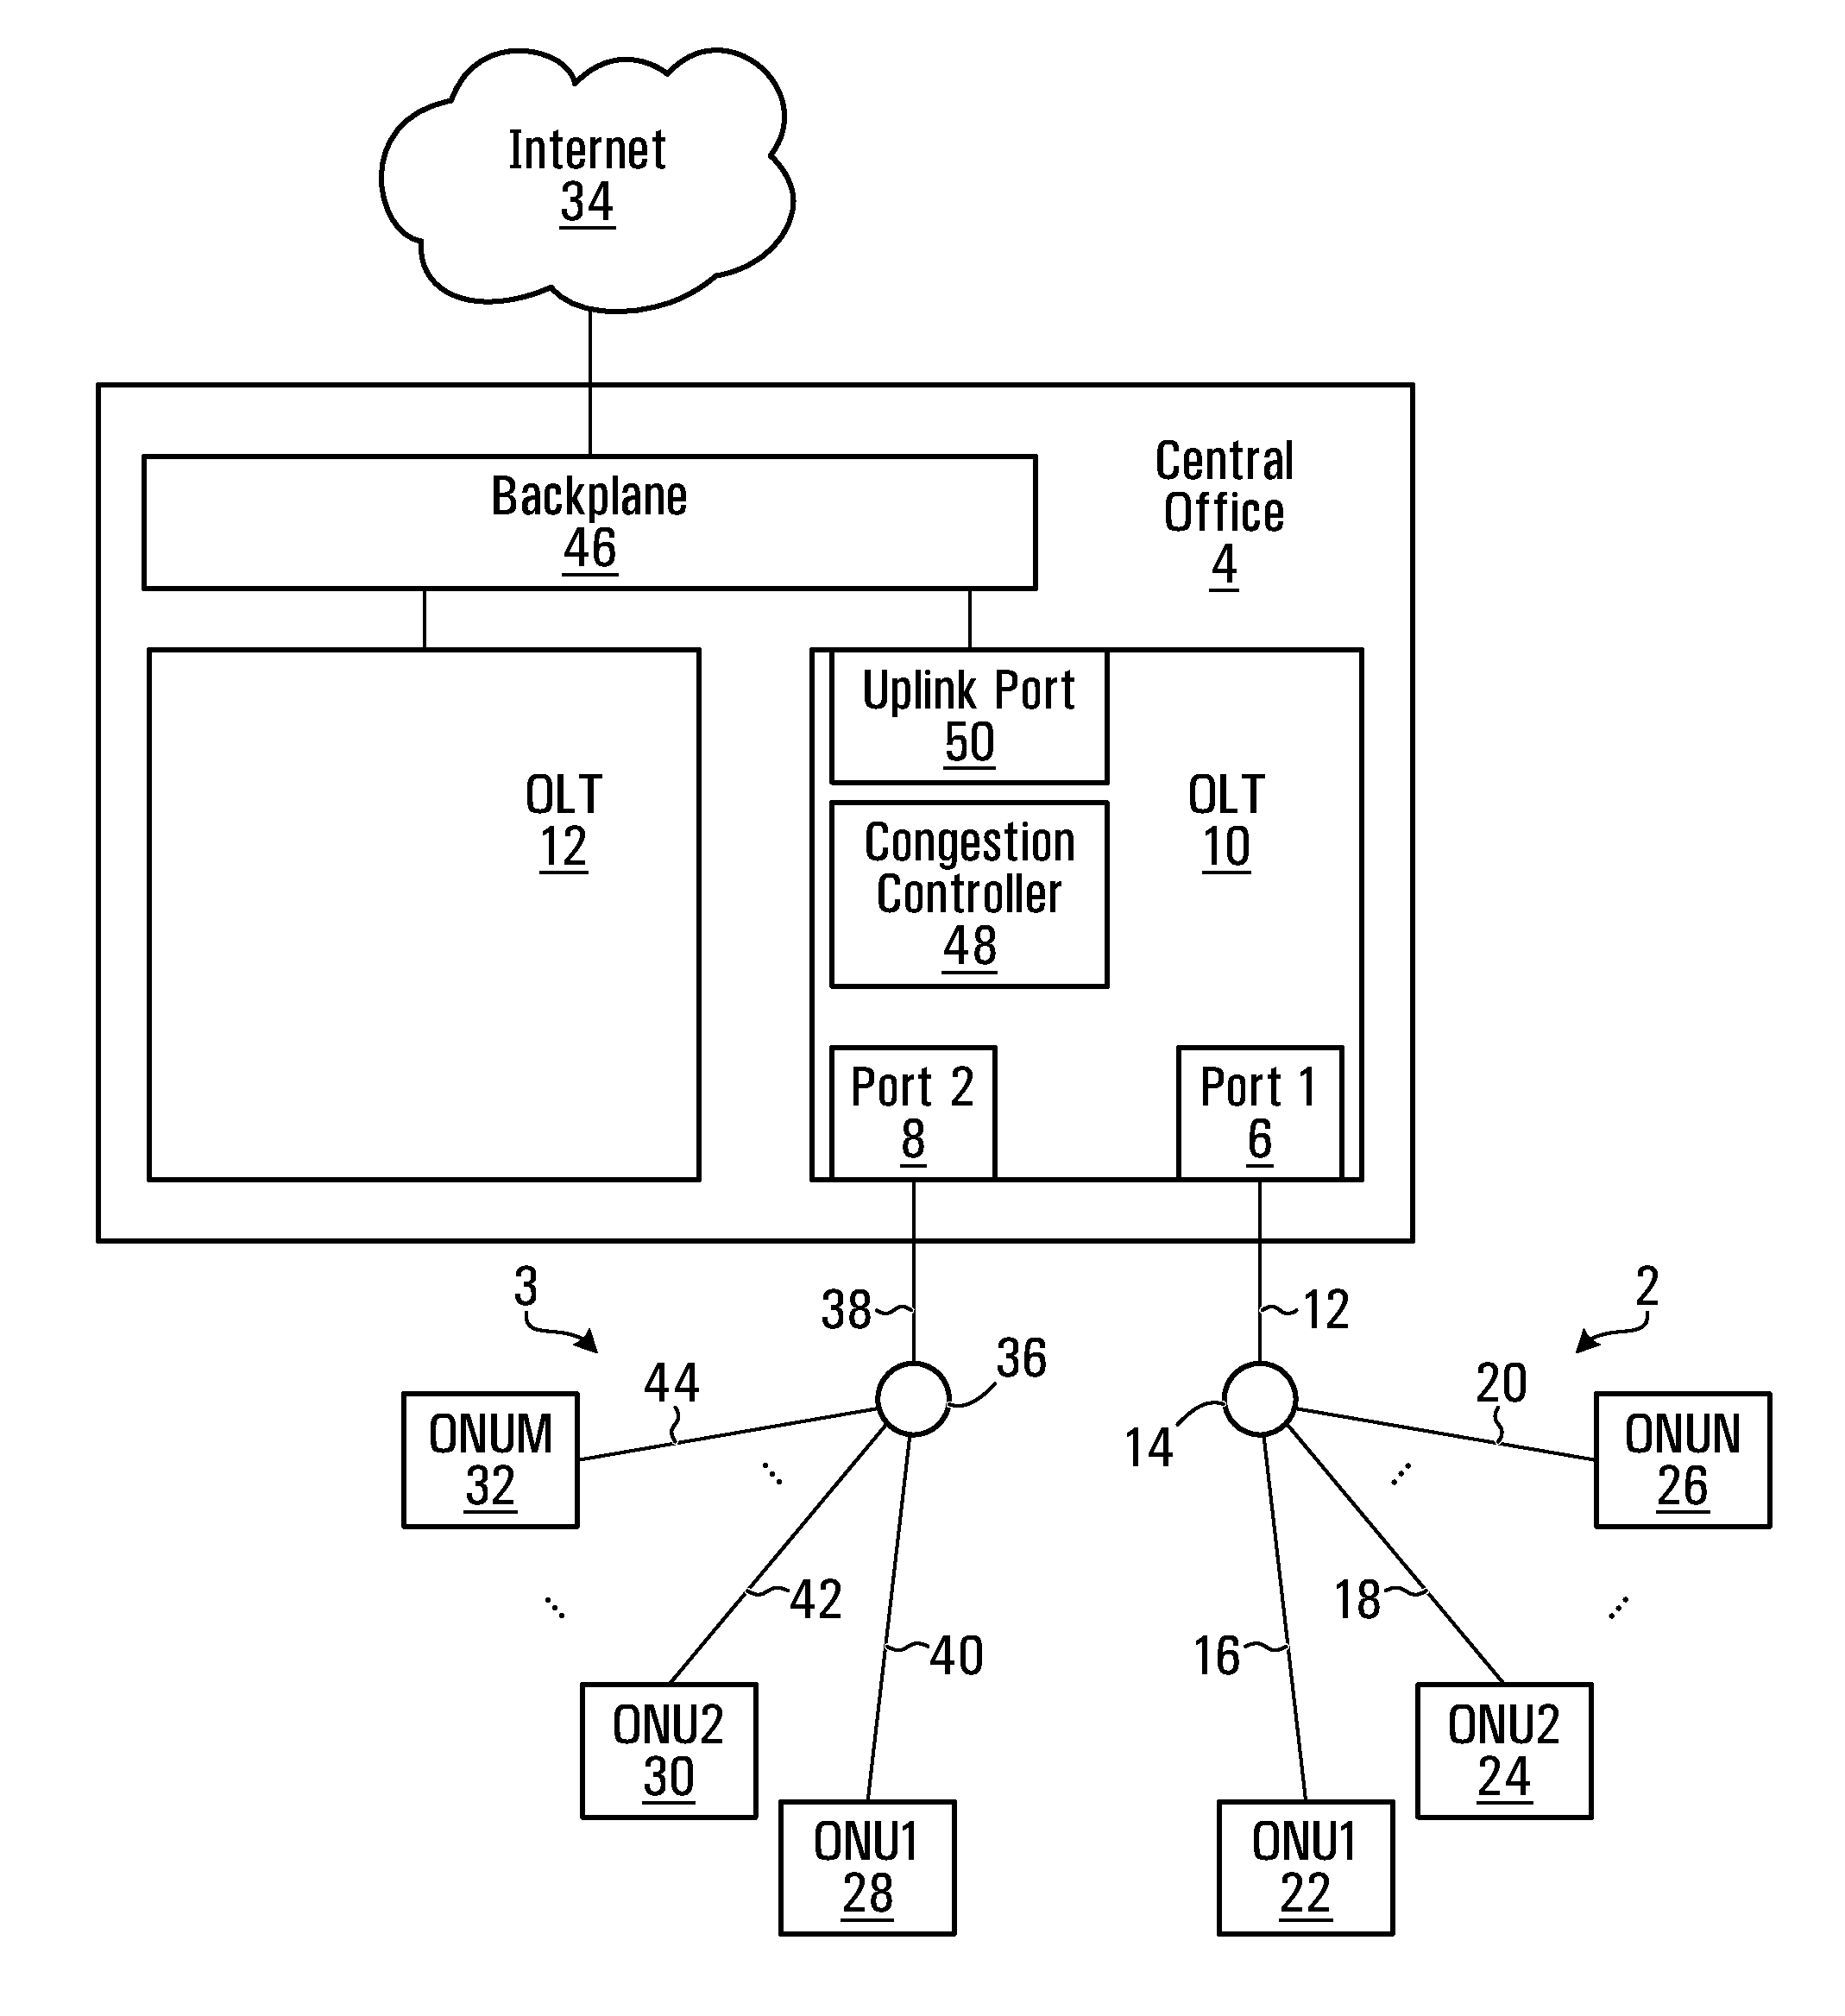 Congestion control in an optical line terminal